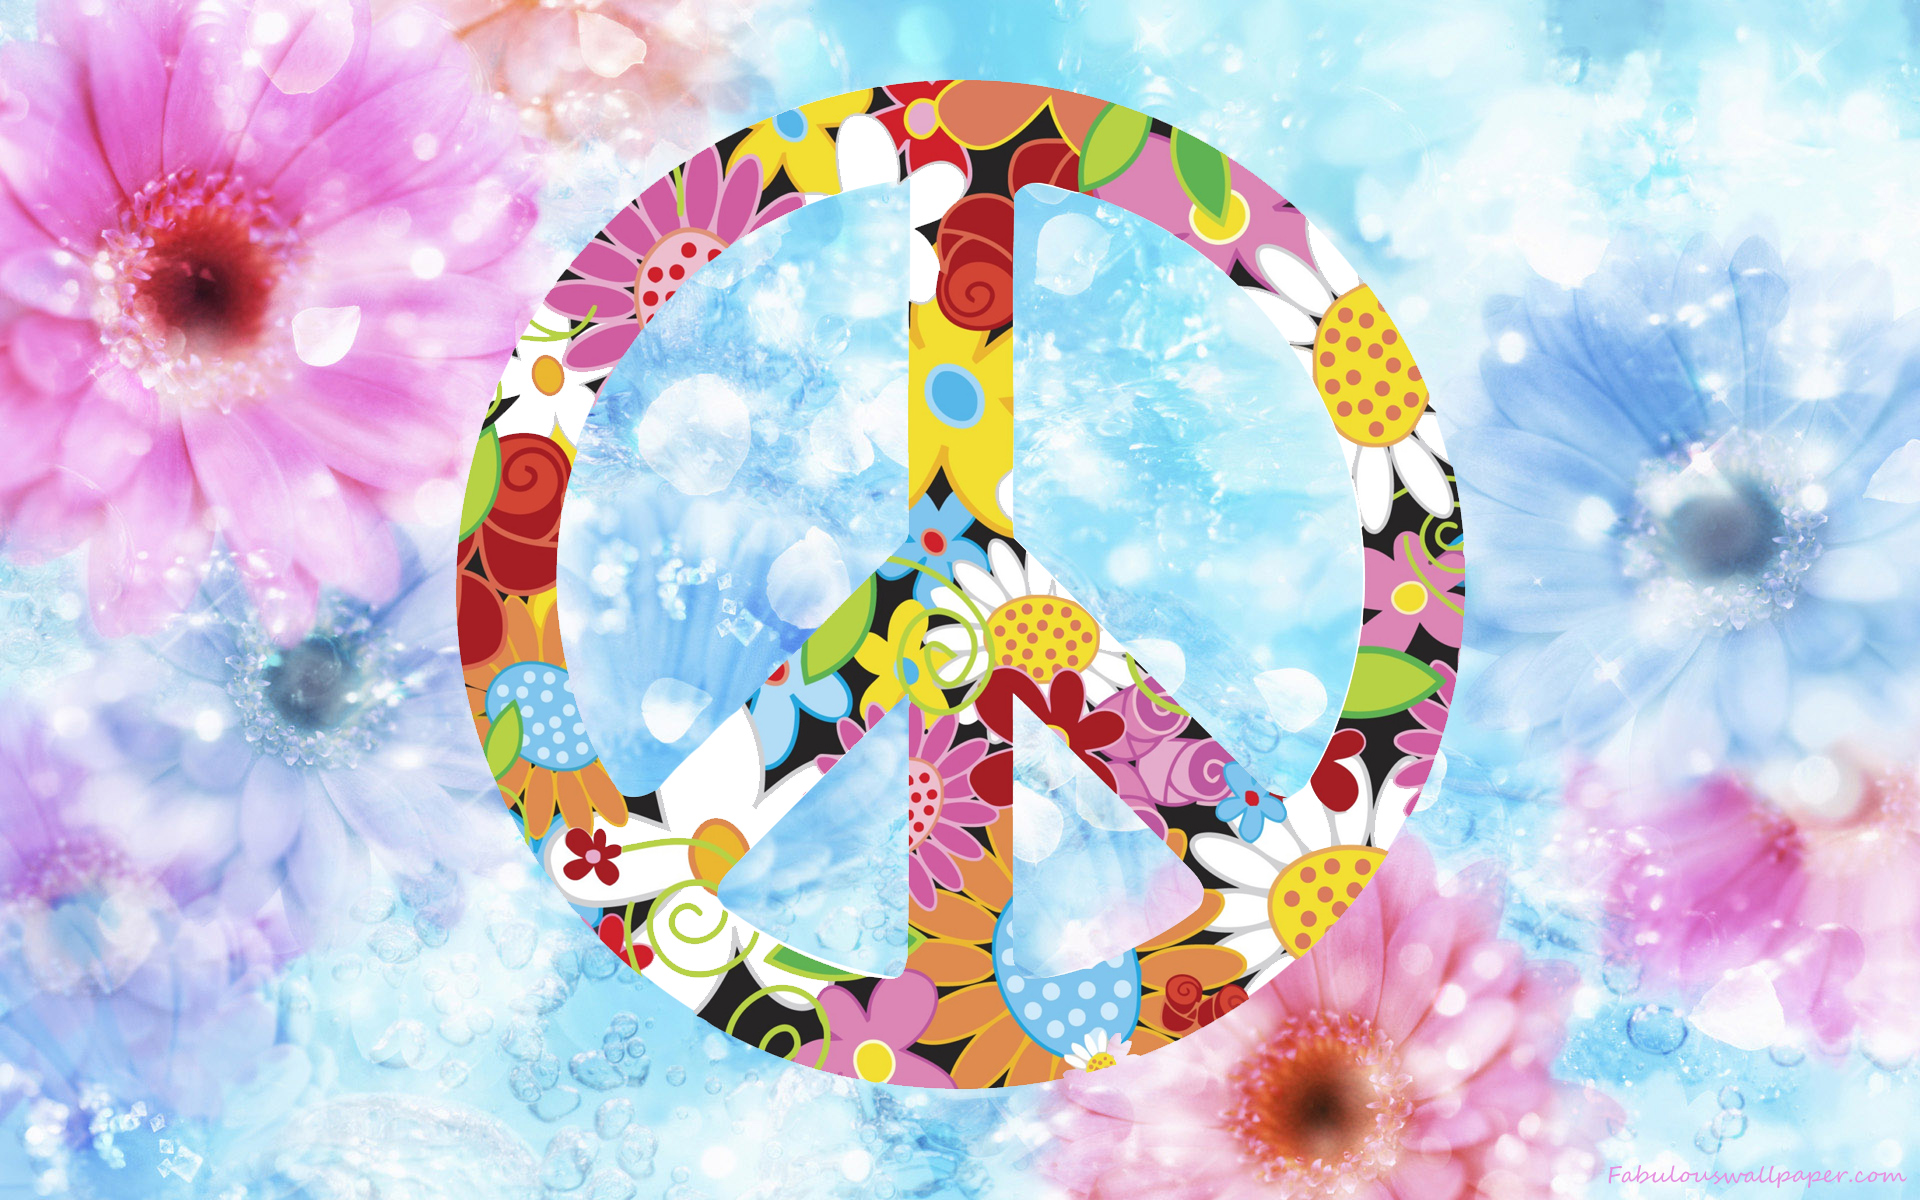 To download click on Peace Day Flowers HD Background then choose save